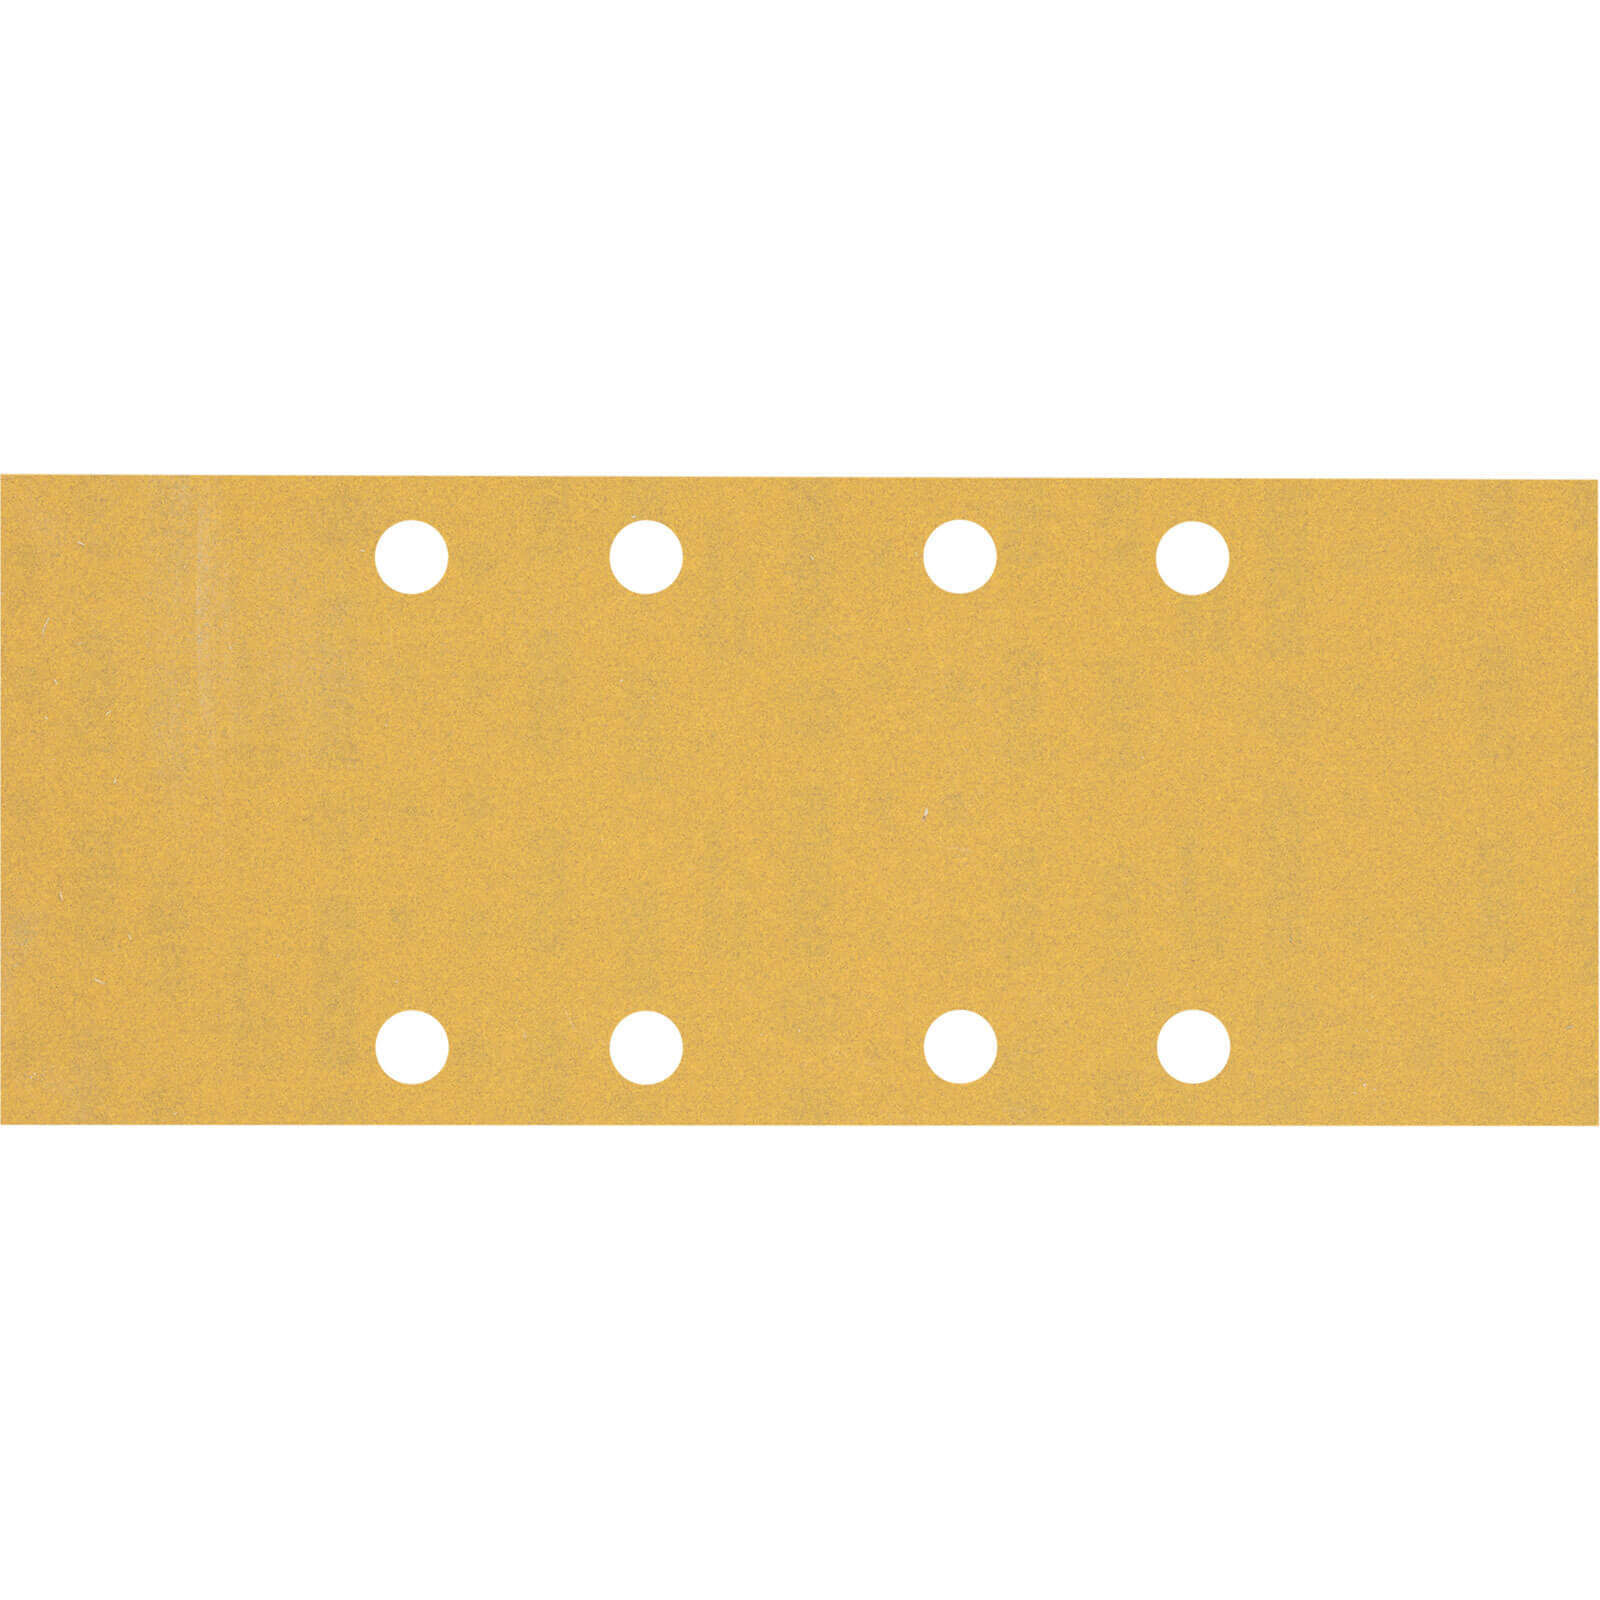 Image of Bosch Expert C470 Best for Wood and Paint Sanding Sheets 93mm x 230mm 180g Pack of 10